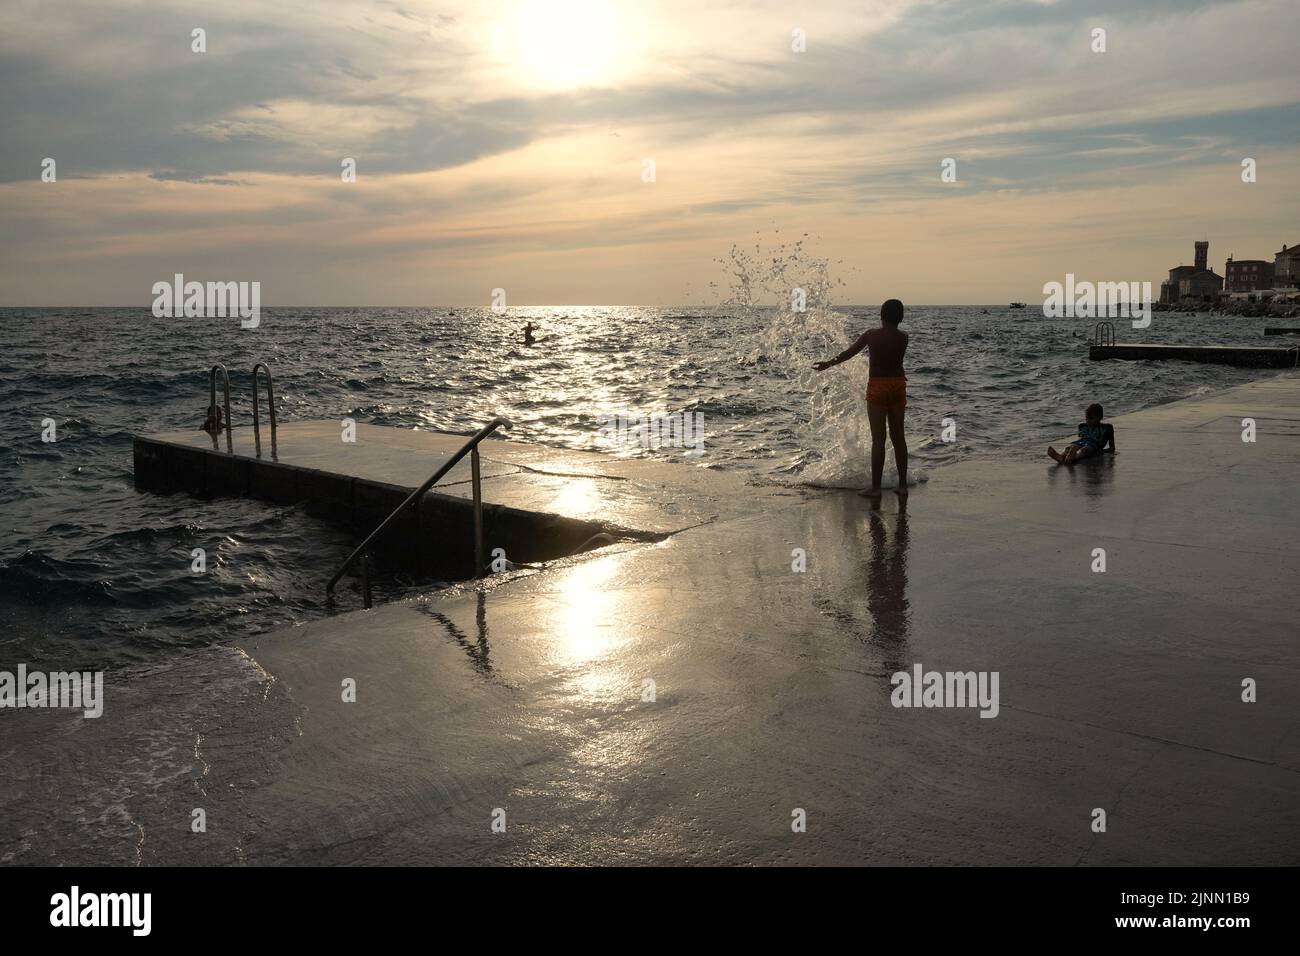 Kids playing with the waves in Piran on the slovenian coast Stock Photo